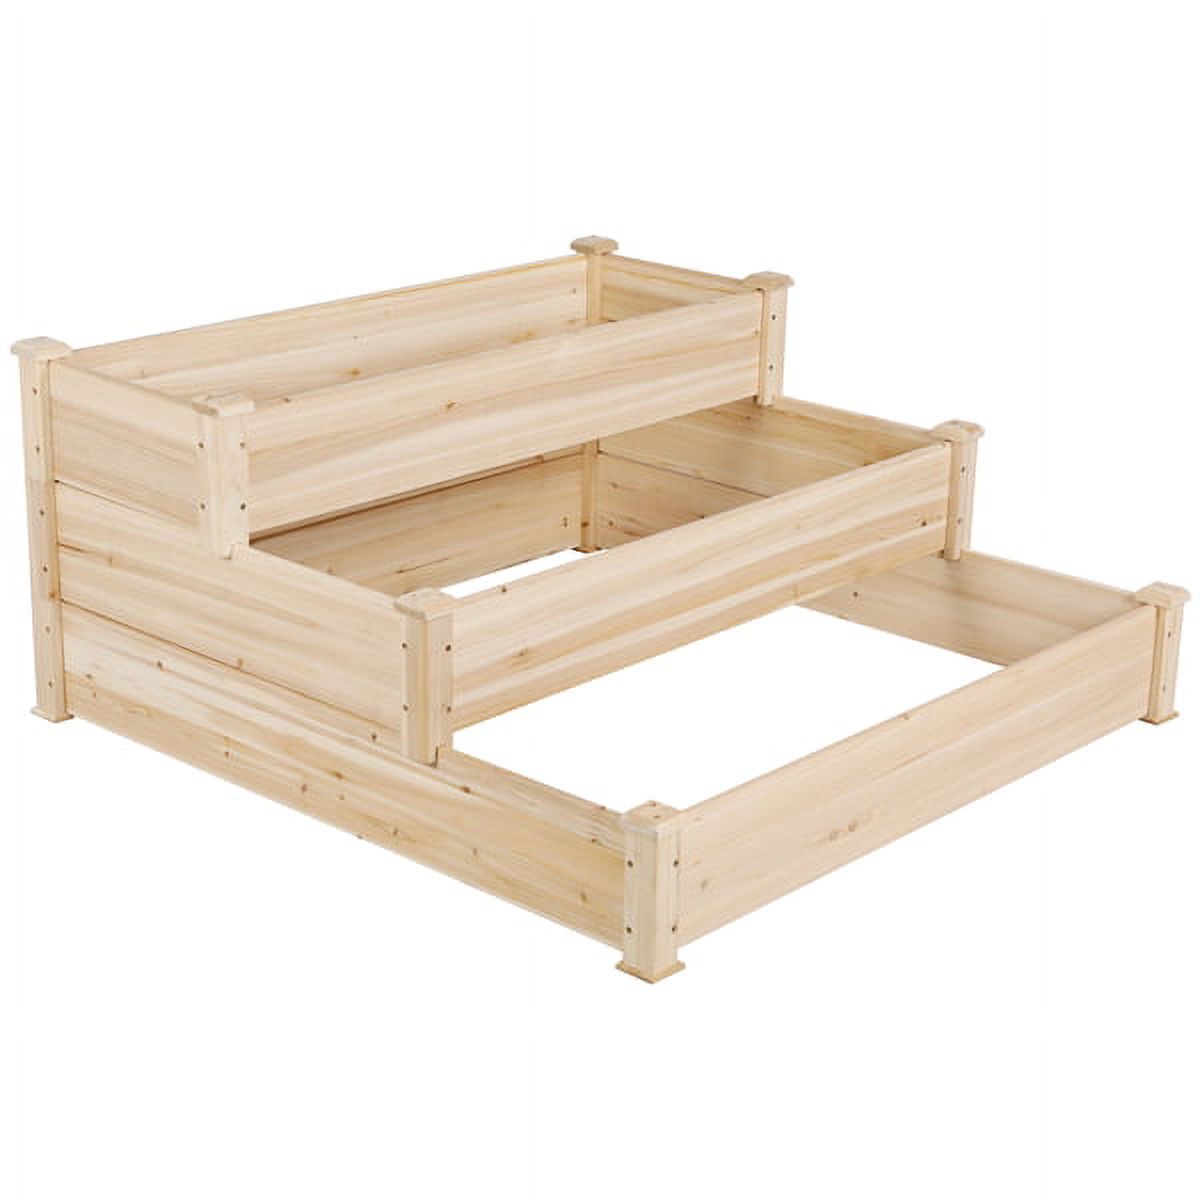 3 Tier Wood Raised Garden Bed Wood Elevated Flowers Vegetables Planter - image 2 of 14